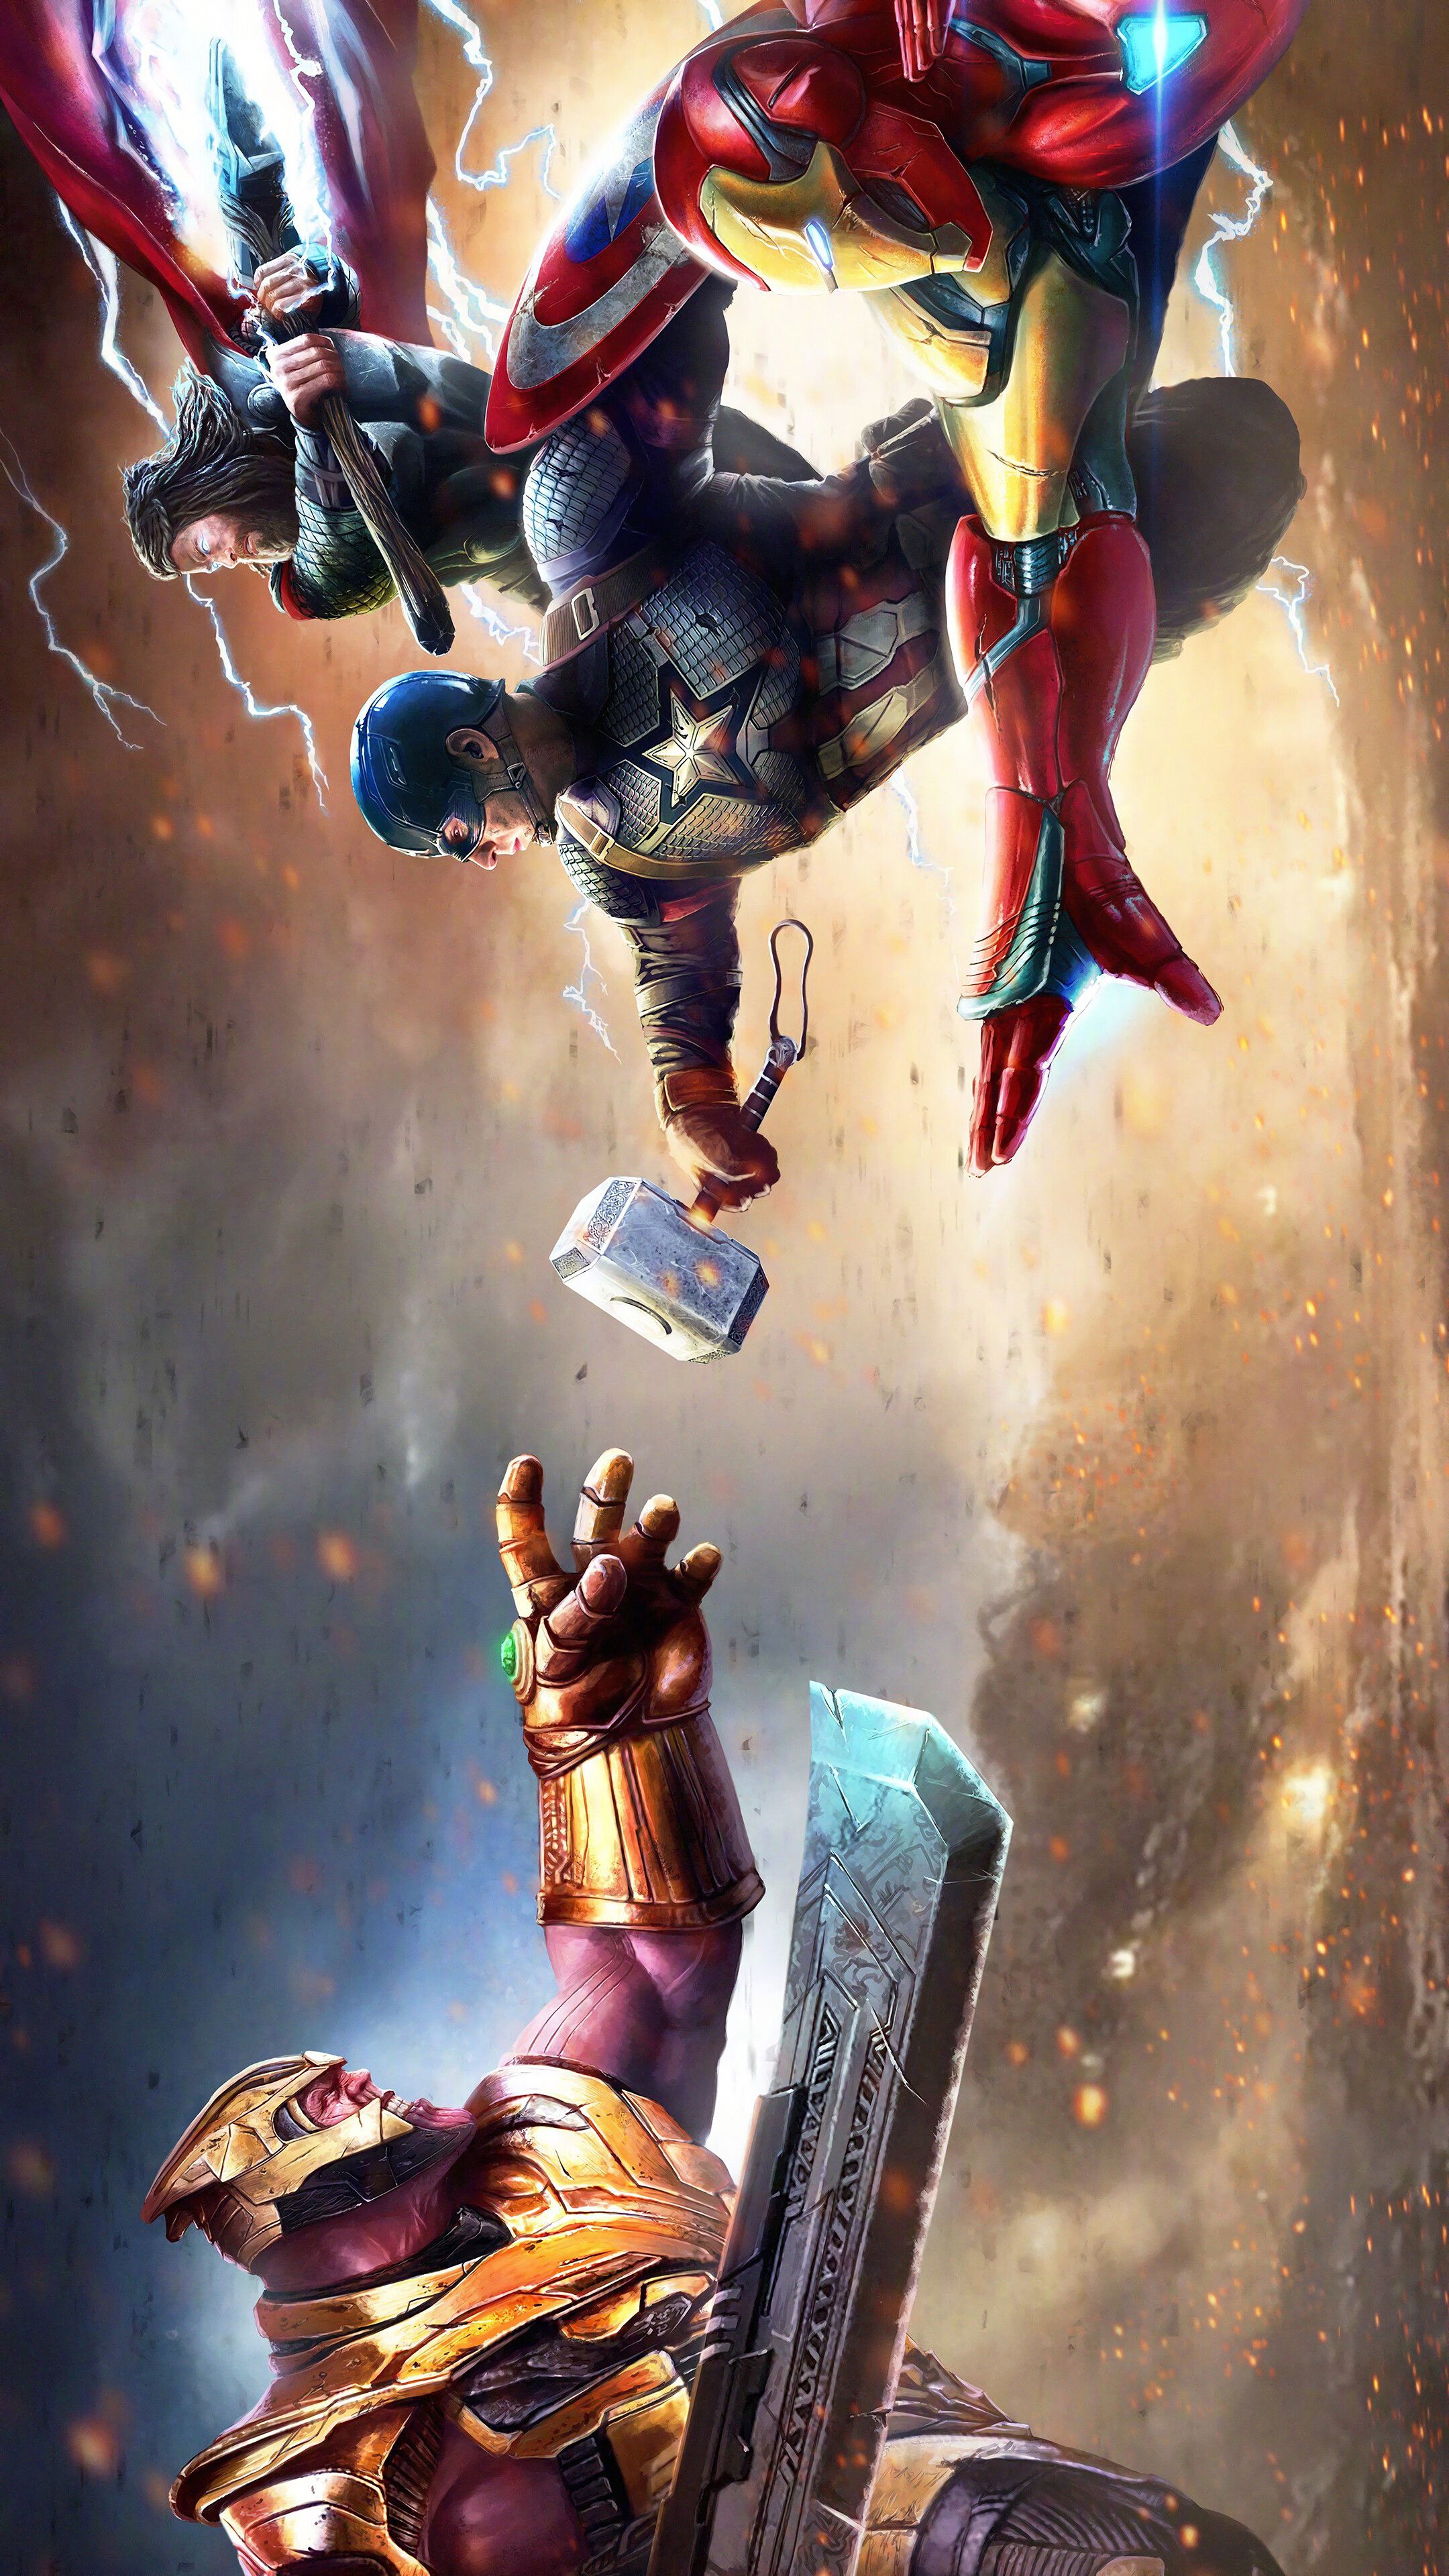 Thanos vs. Iron Man, Captain America, Thor, Avengers Endgame phone HD Wallpaper, Image, Background, Photo and Picture